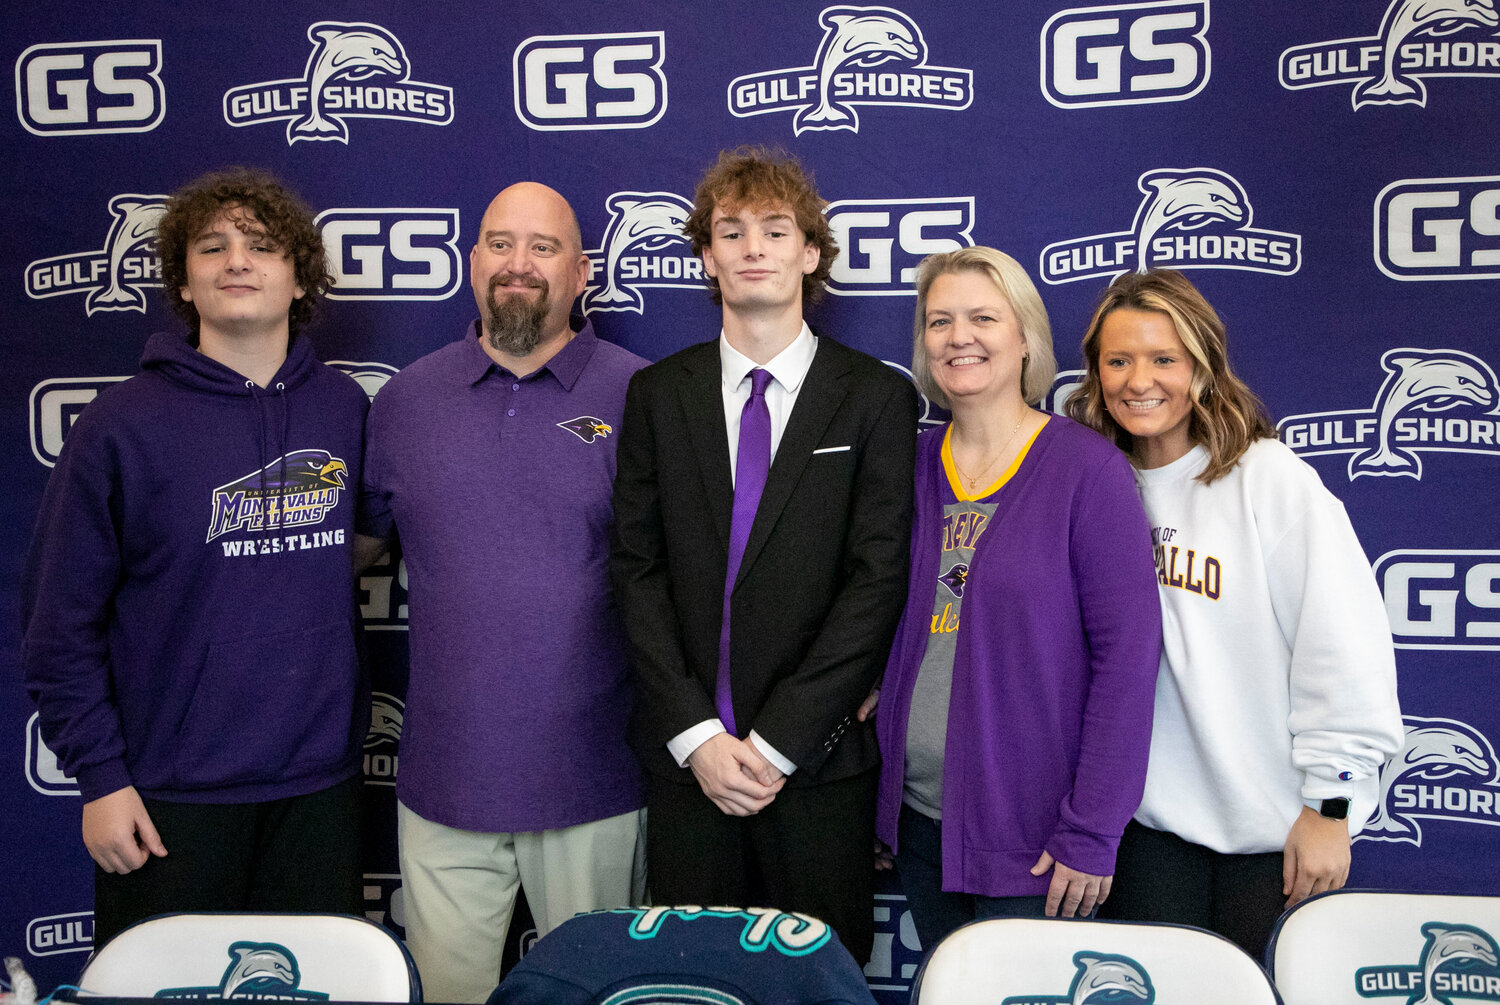 Ethan Sharkey was joined by his family in signing National Letters of Intent to wrestle and run outdoor track for the Montevallo Falcons after his time as a Gulf Shores Dolphin. The high school hosted a ceremony on Wednesday, Jan. 24, where Sharkey expressed his appreciation for those who helped him reach that point.